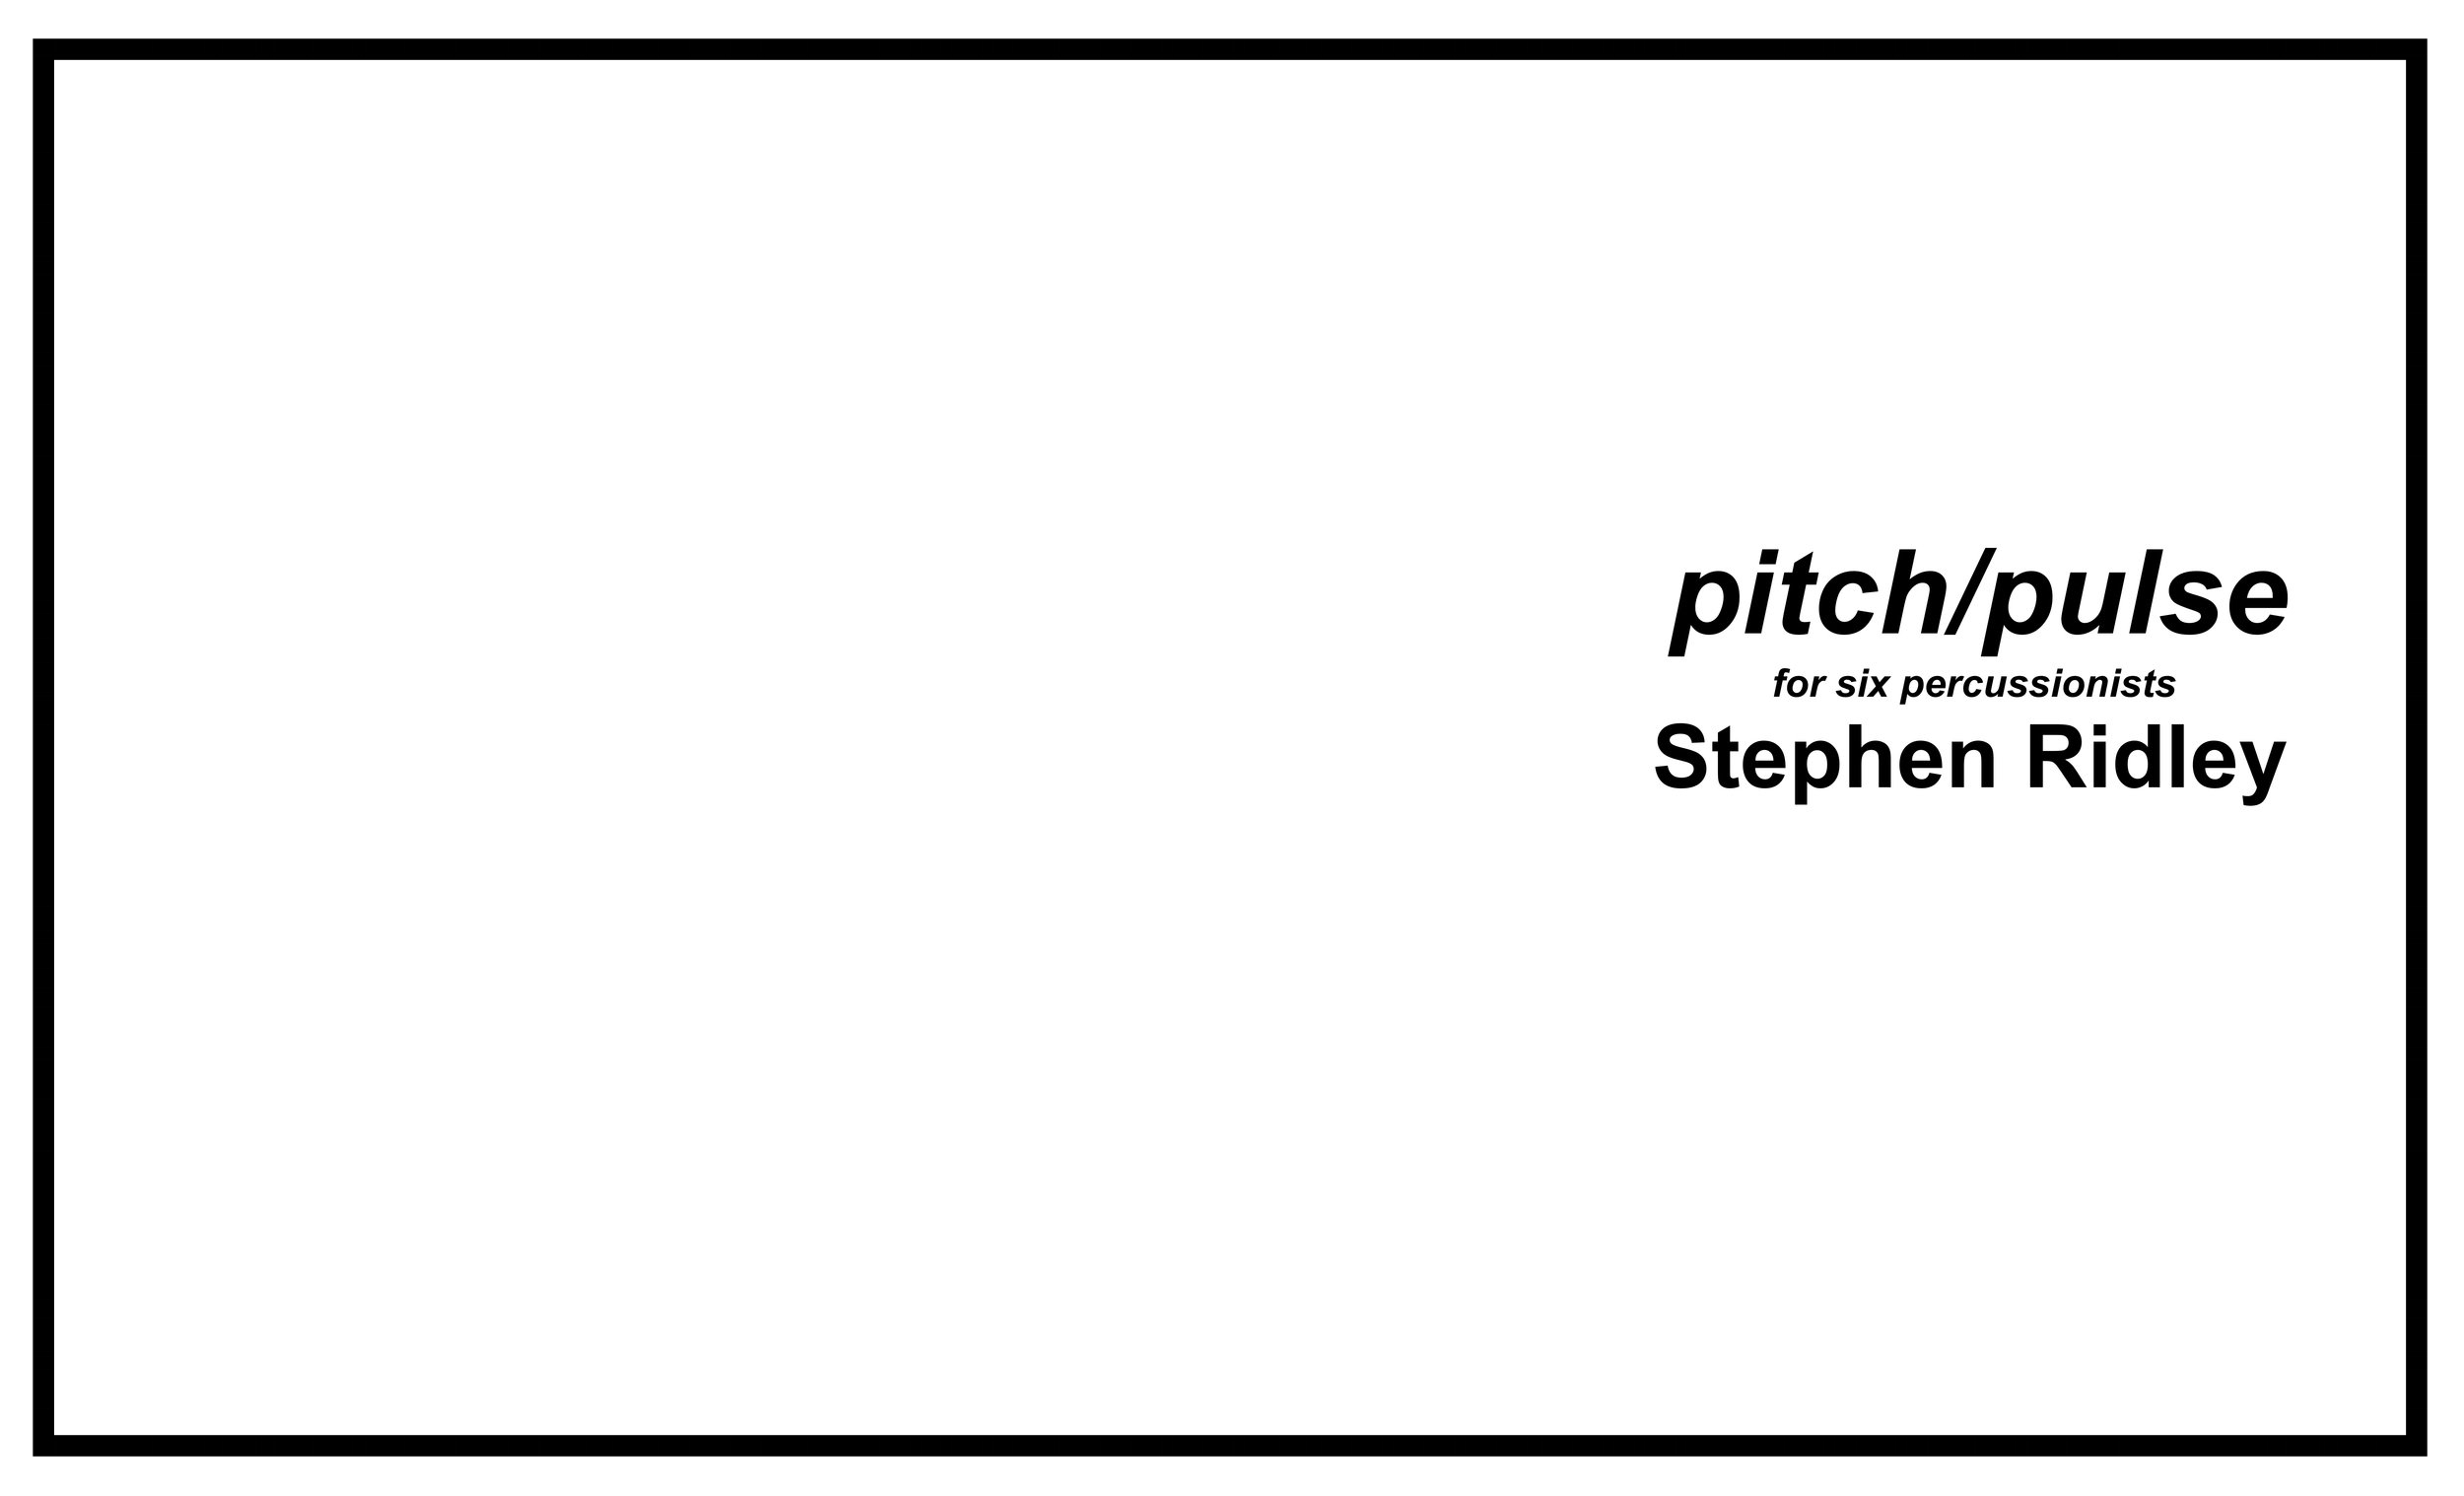 Stephen Ridley pitch/pulse cover